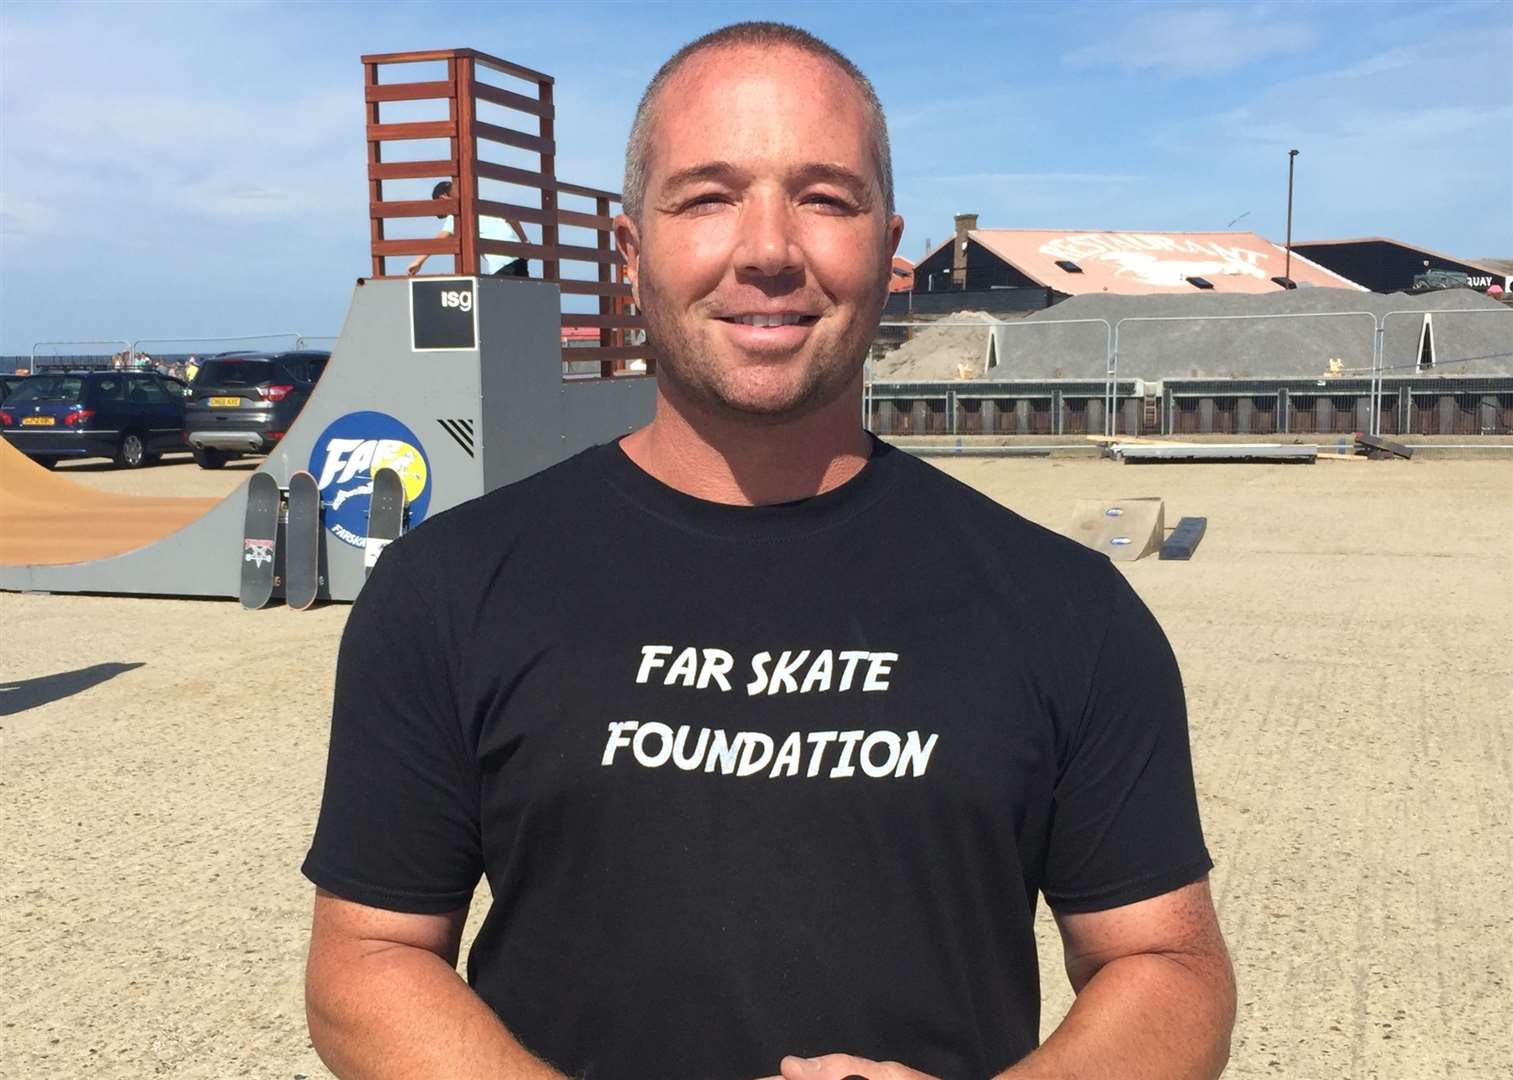 Brent Lewis, CEO and founder of Far Skate Foundation